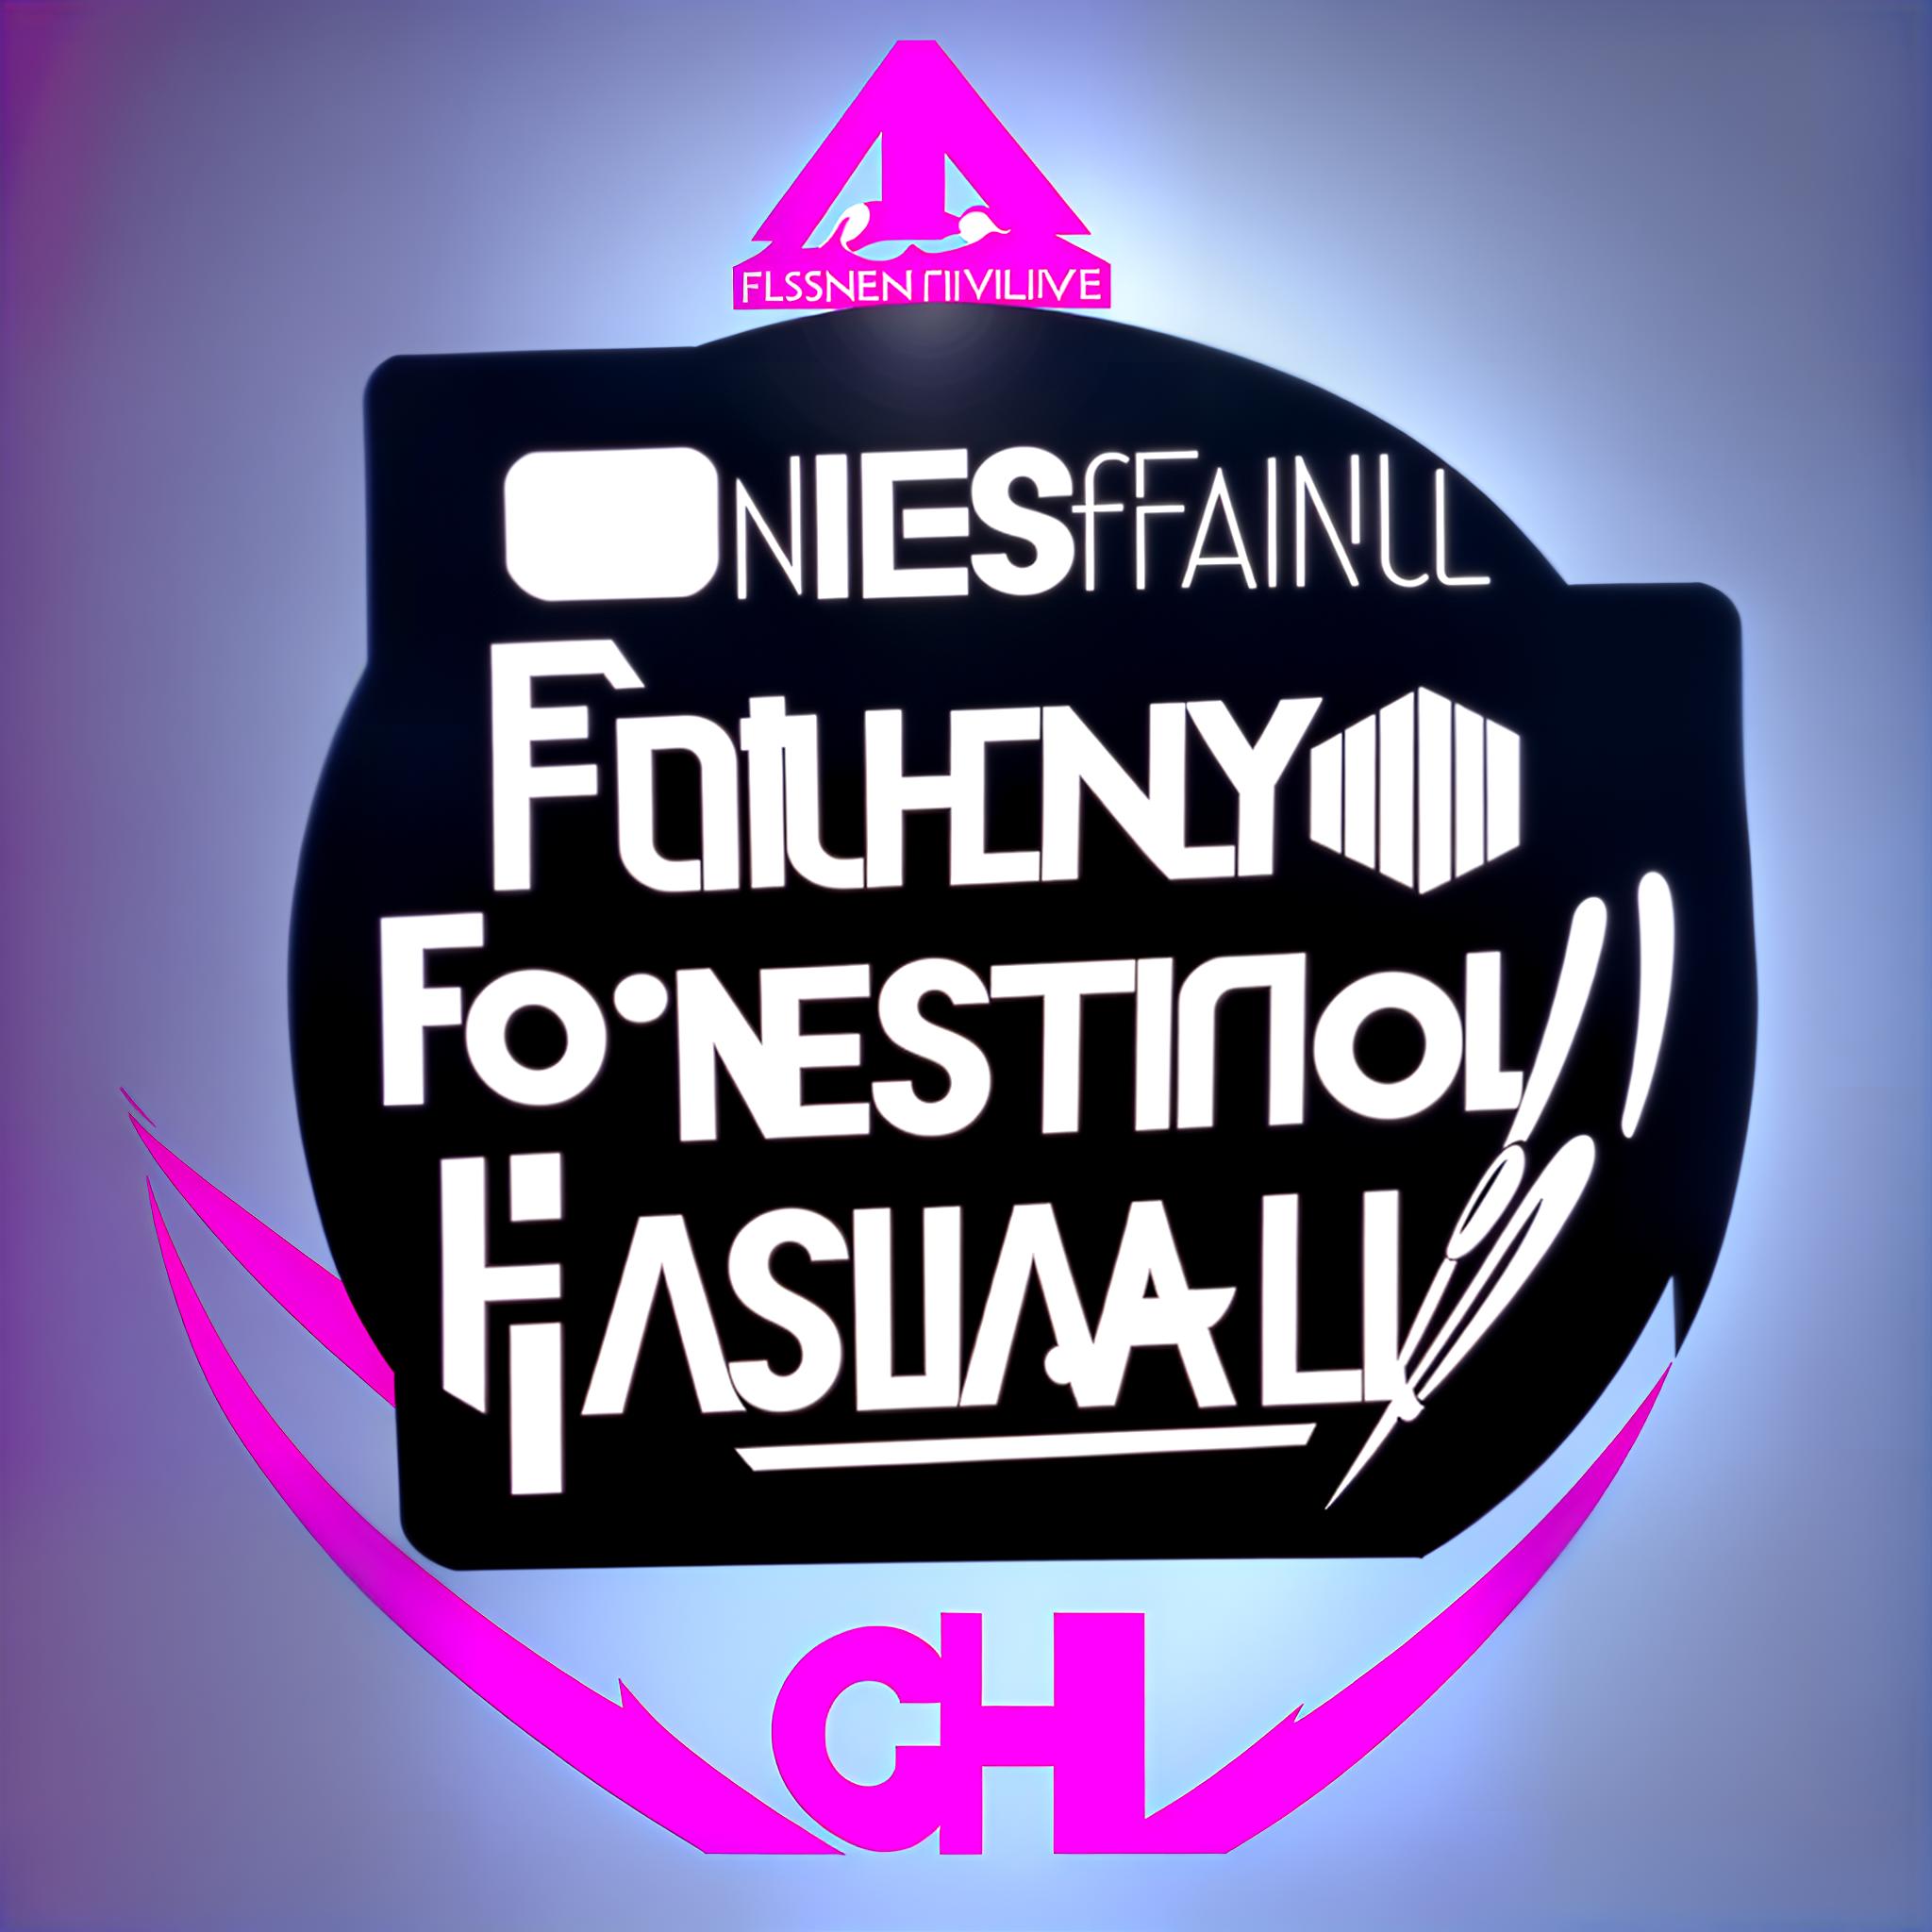  A professional concise logo on the theme of a fashionable film festival.